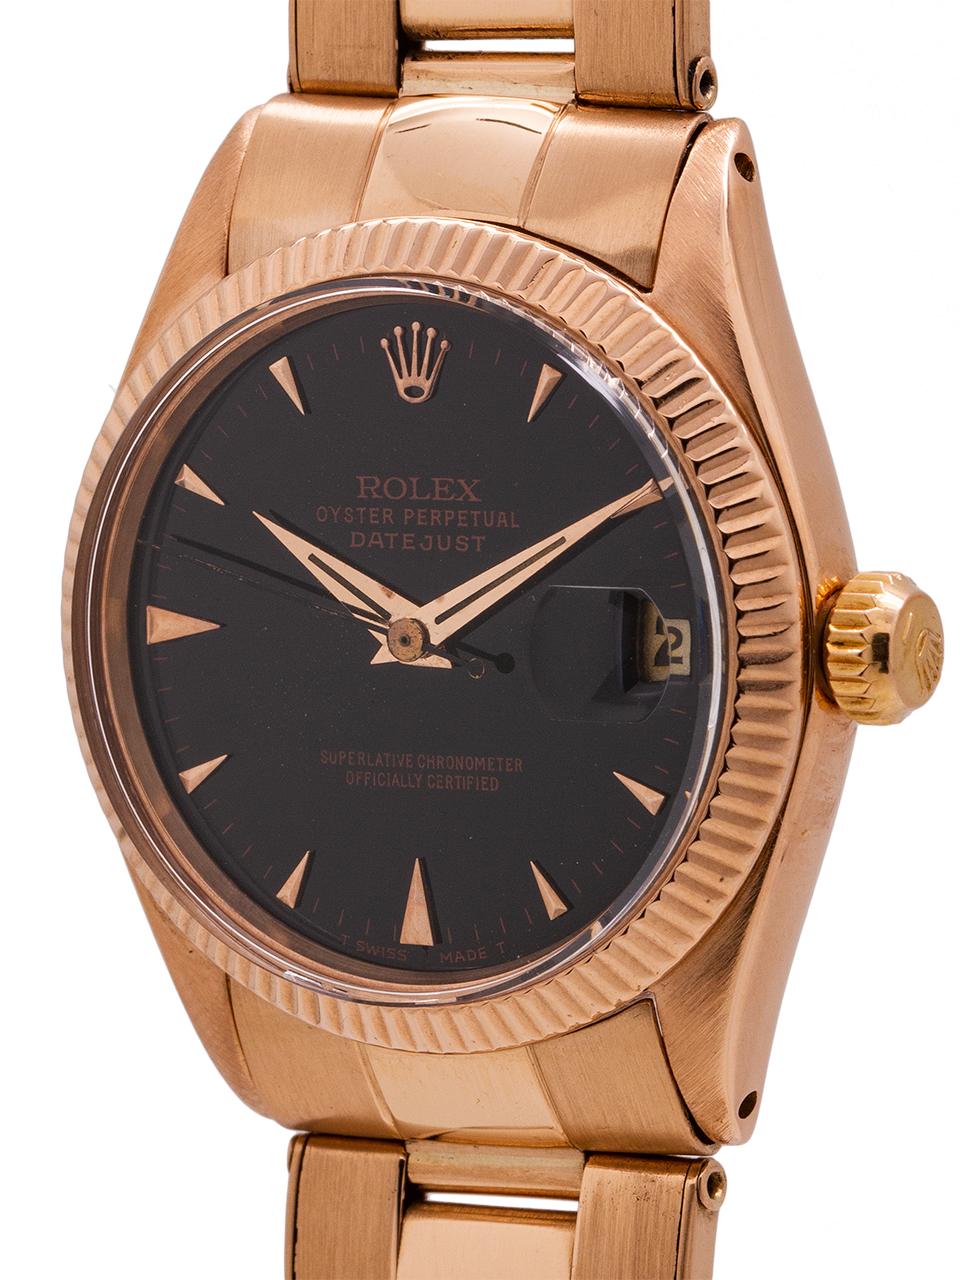 
Rolex midsize Datejust ref 6627 18K rose gold circa 1968. Featuring 31mm diameter case with fluted bezel, acrylic crystal, beautifully restored glossy black dial with applied pink indexes and pink baton hands and rose gold screw down crown. Powered